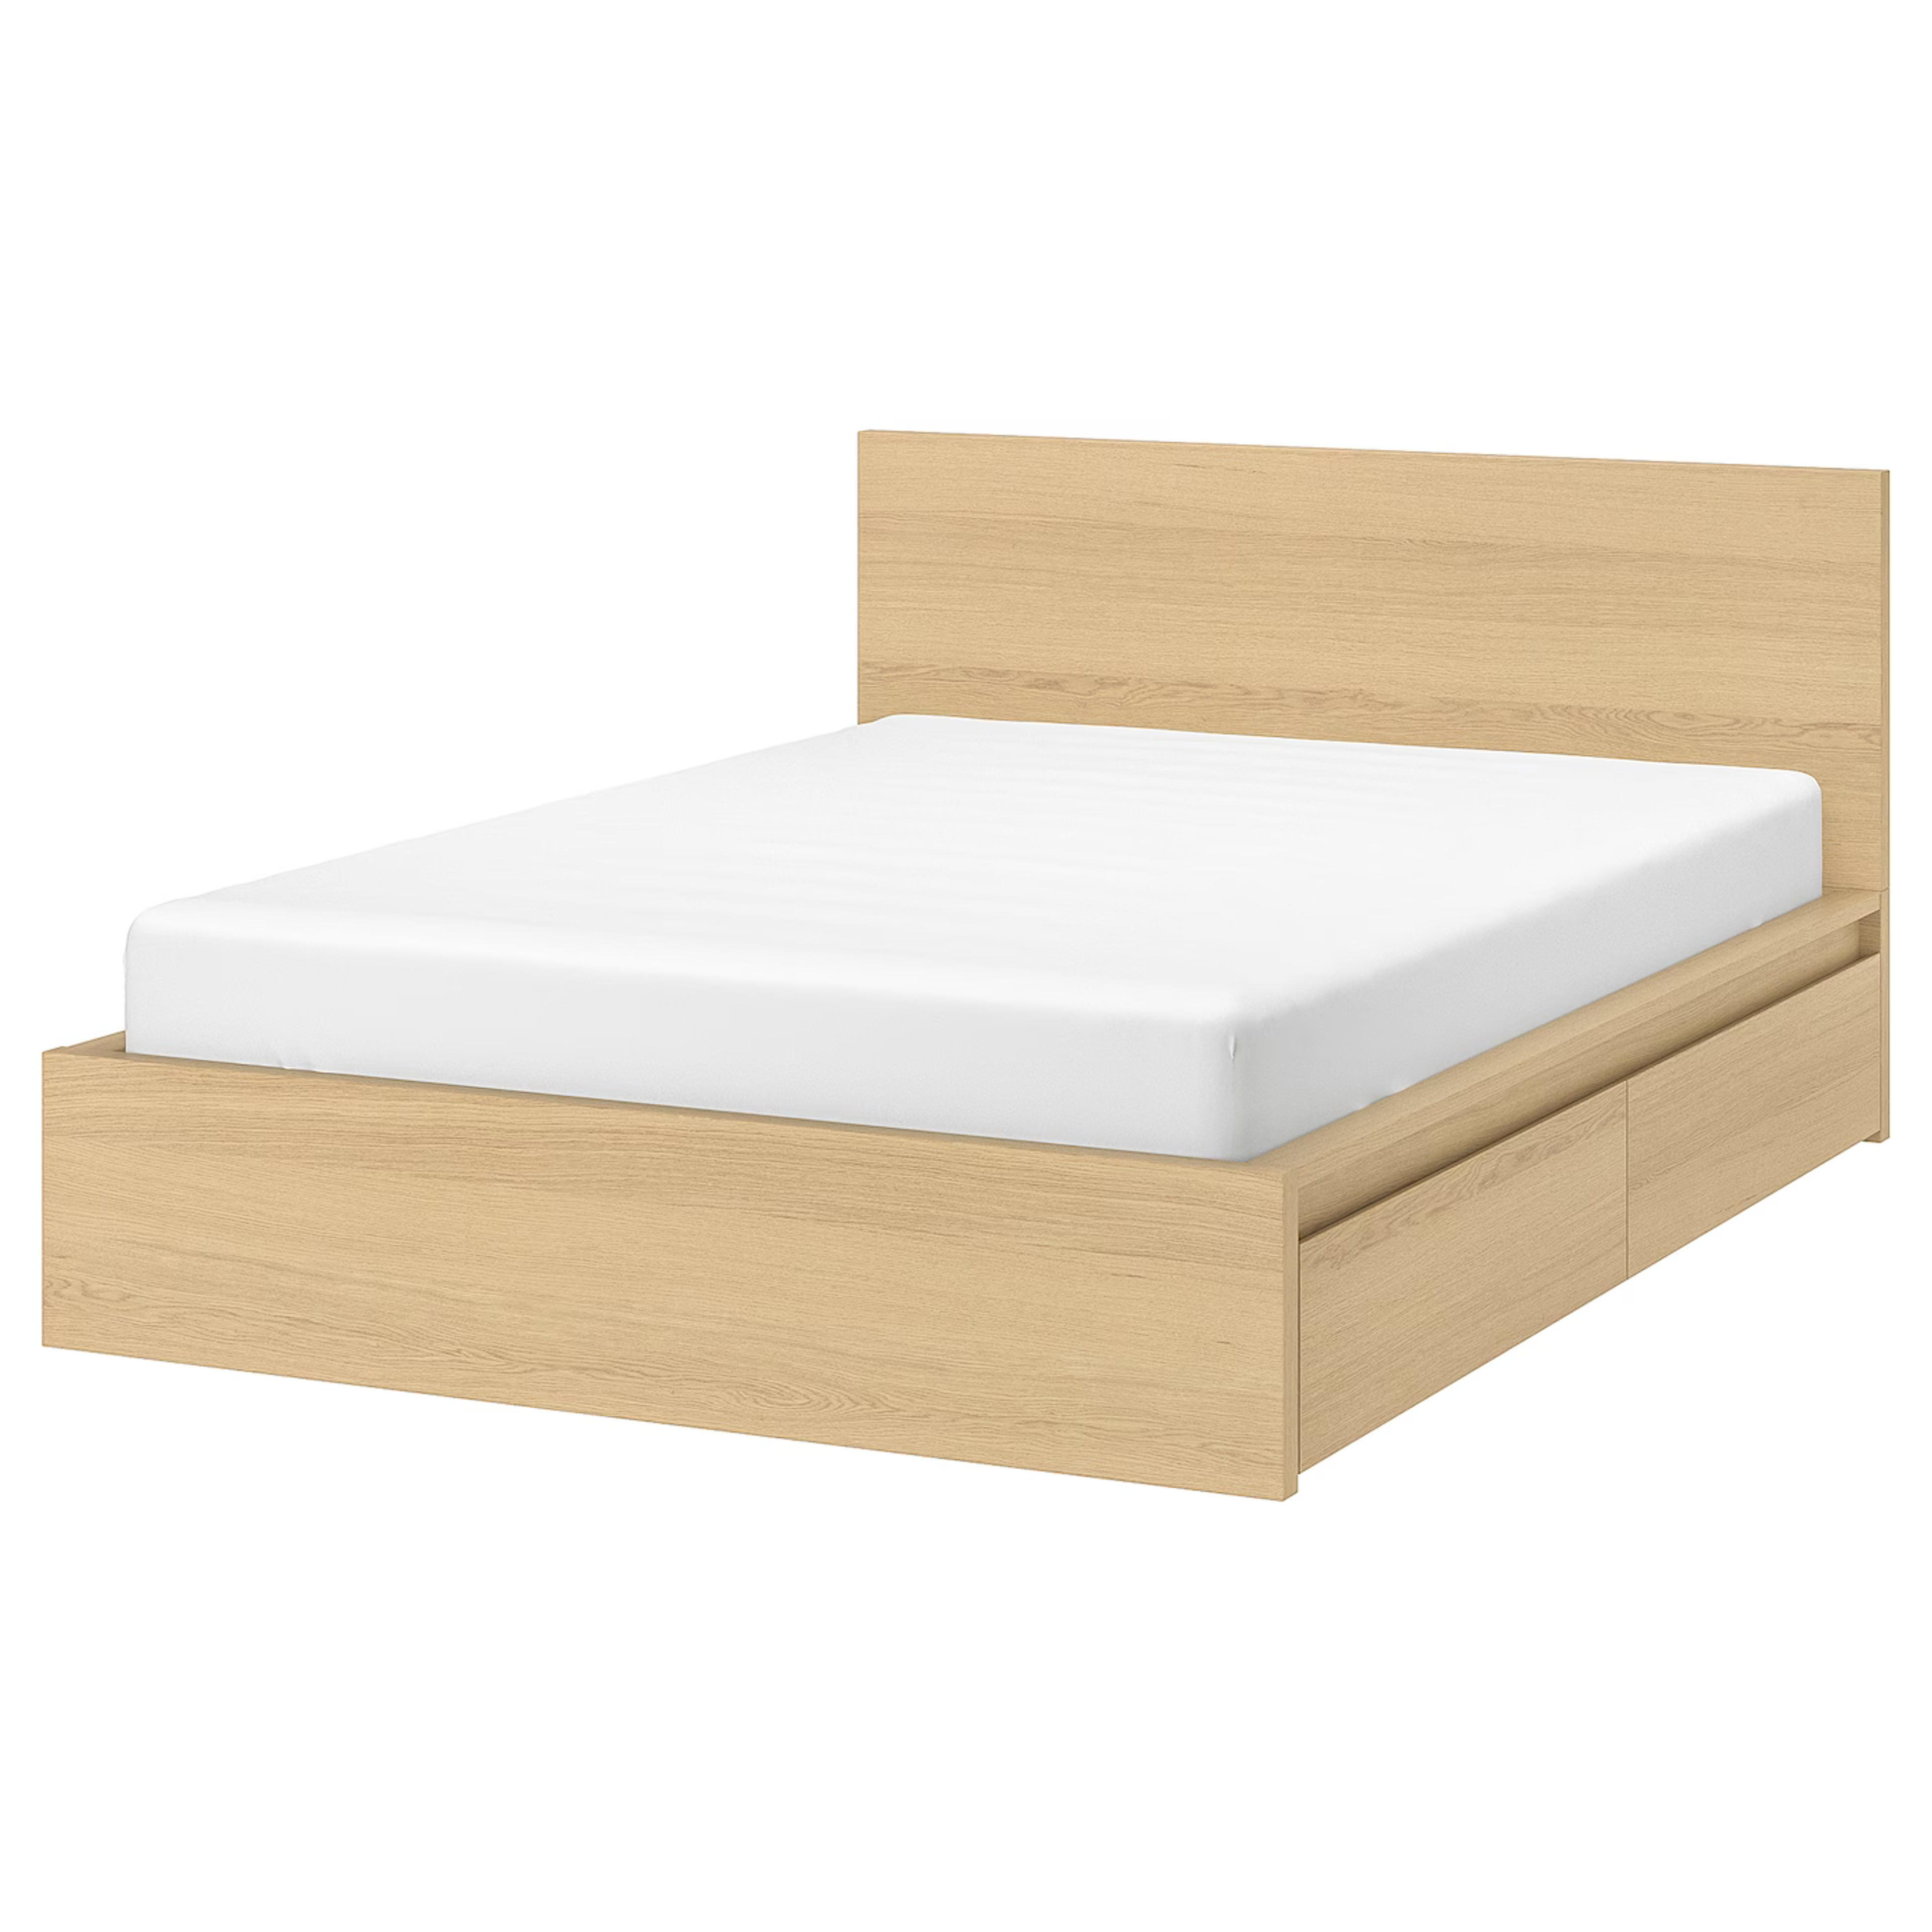 MALM High bed frame/2 storage boxes - white stained oak veneer/Luröy Queen